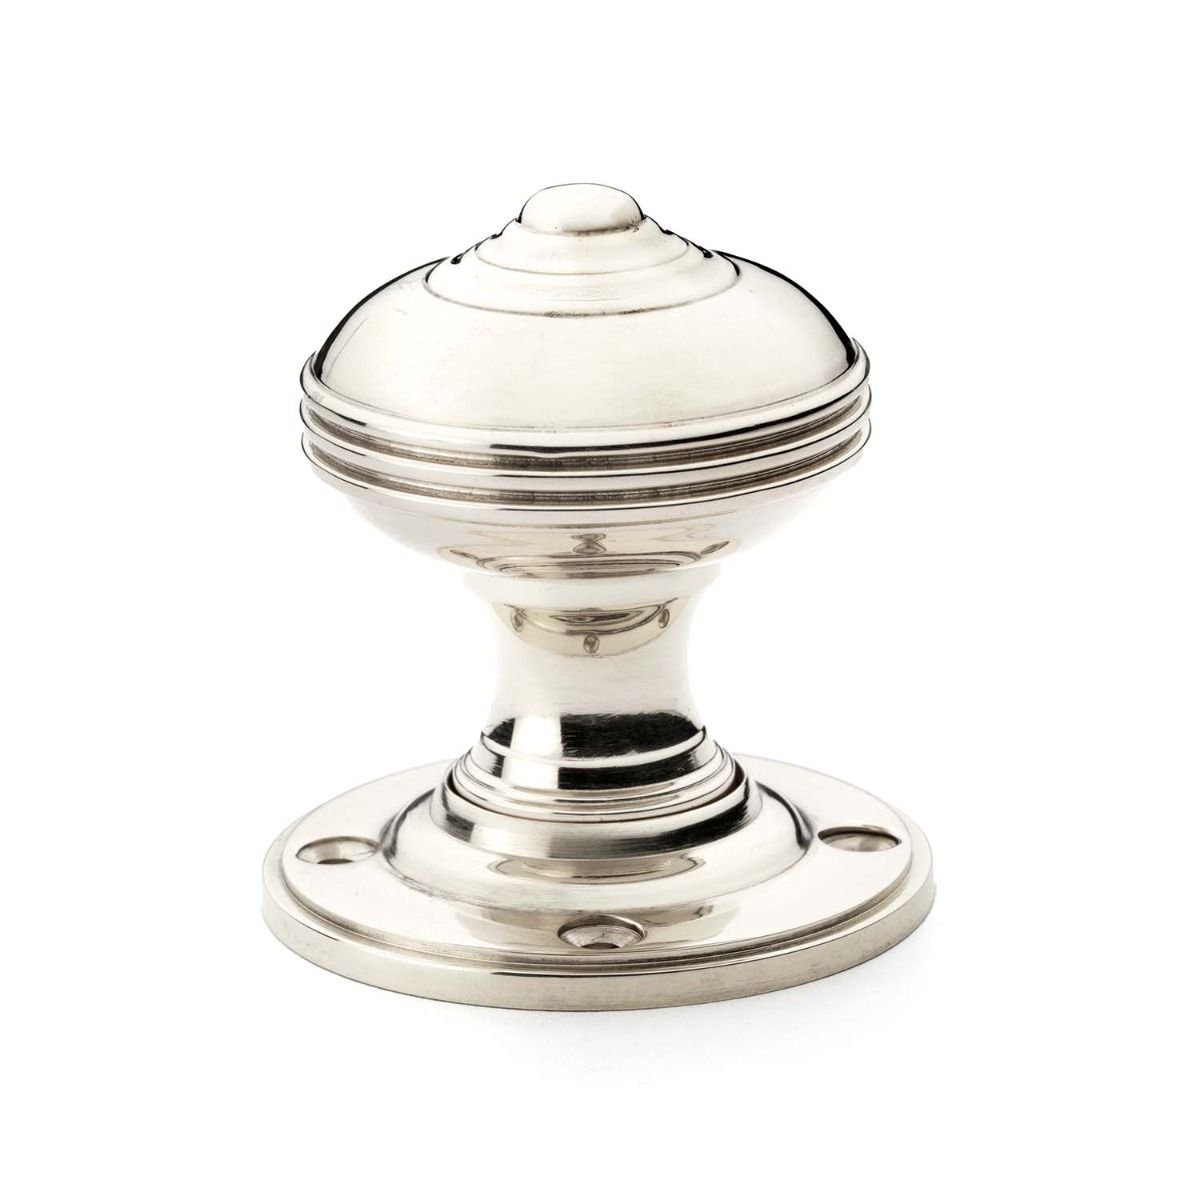 Alexander And Wilks Romeo Mortice Knob 50mm Dia. Polished Nickel AW304-50-PN